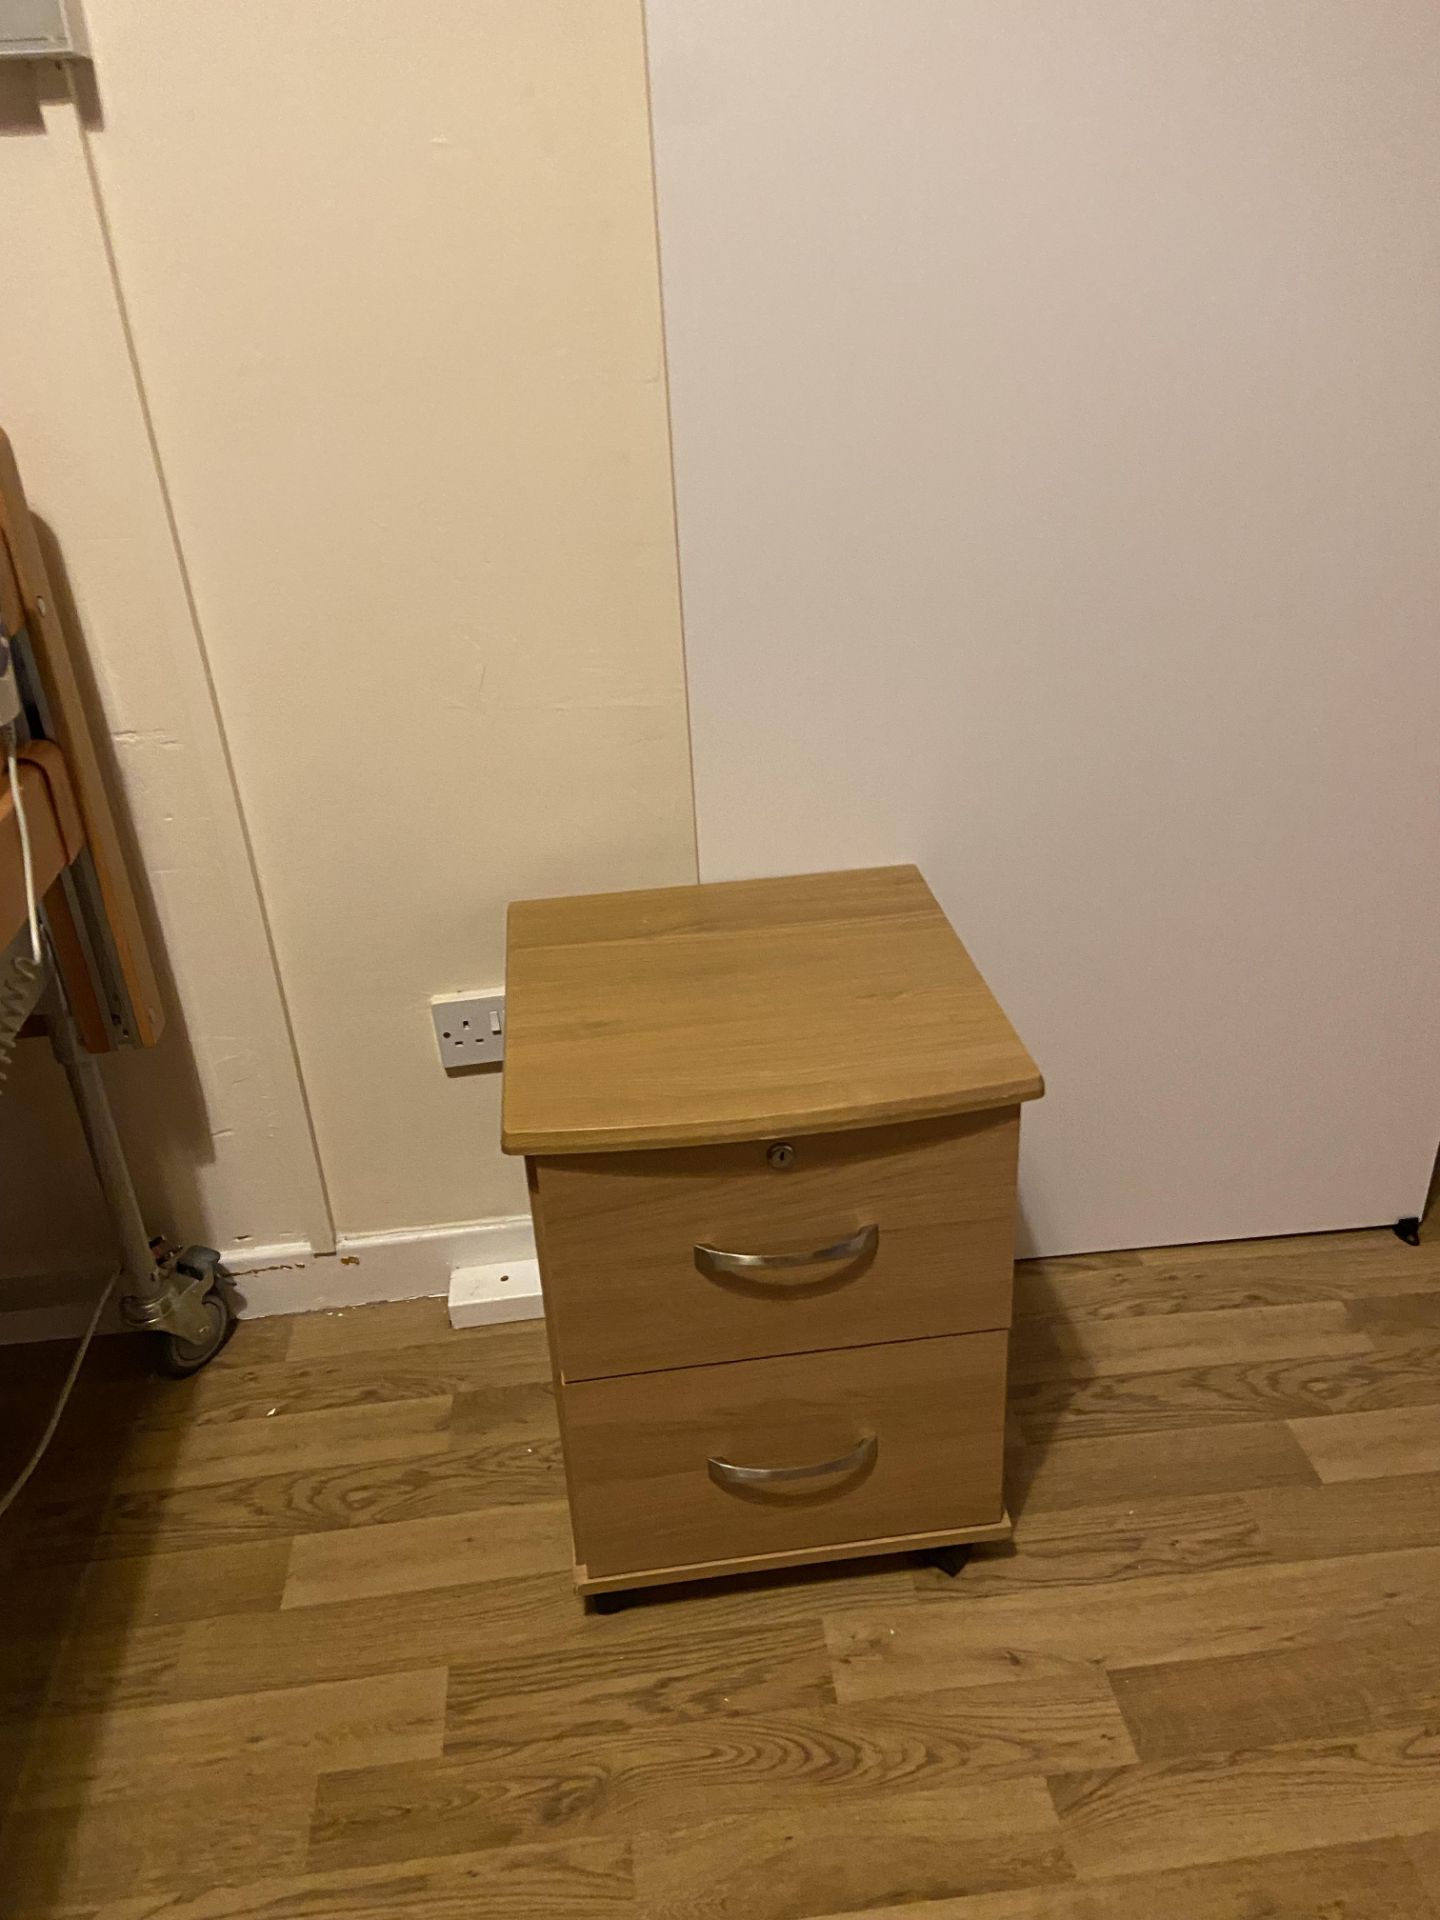 Remaining Bedroom Furniture, including oak laminated wardrobe, three drawer chest-of-drawers, two